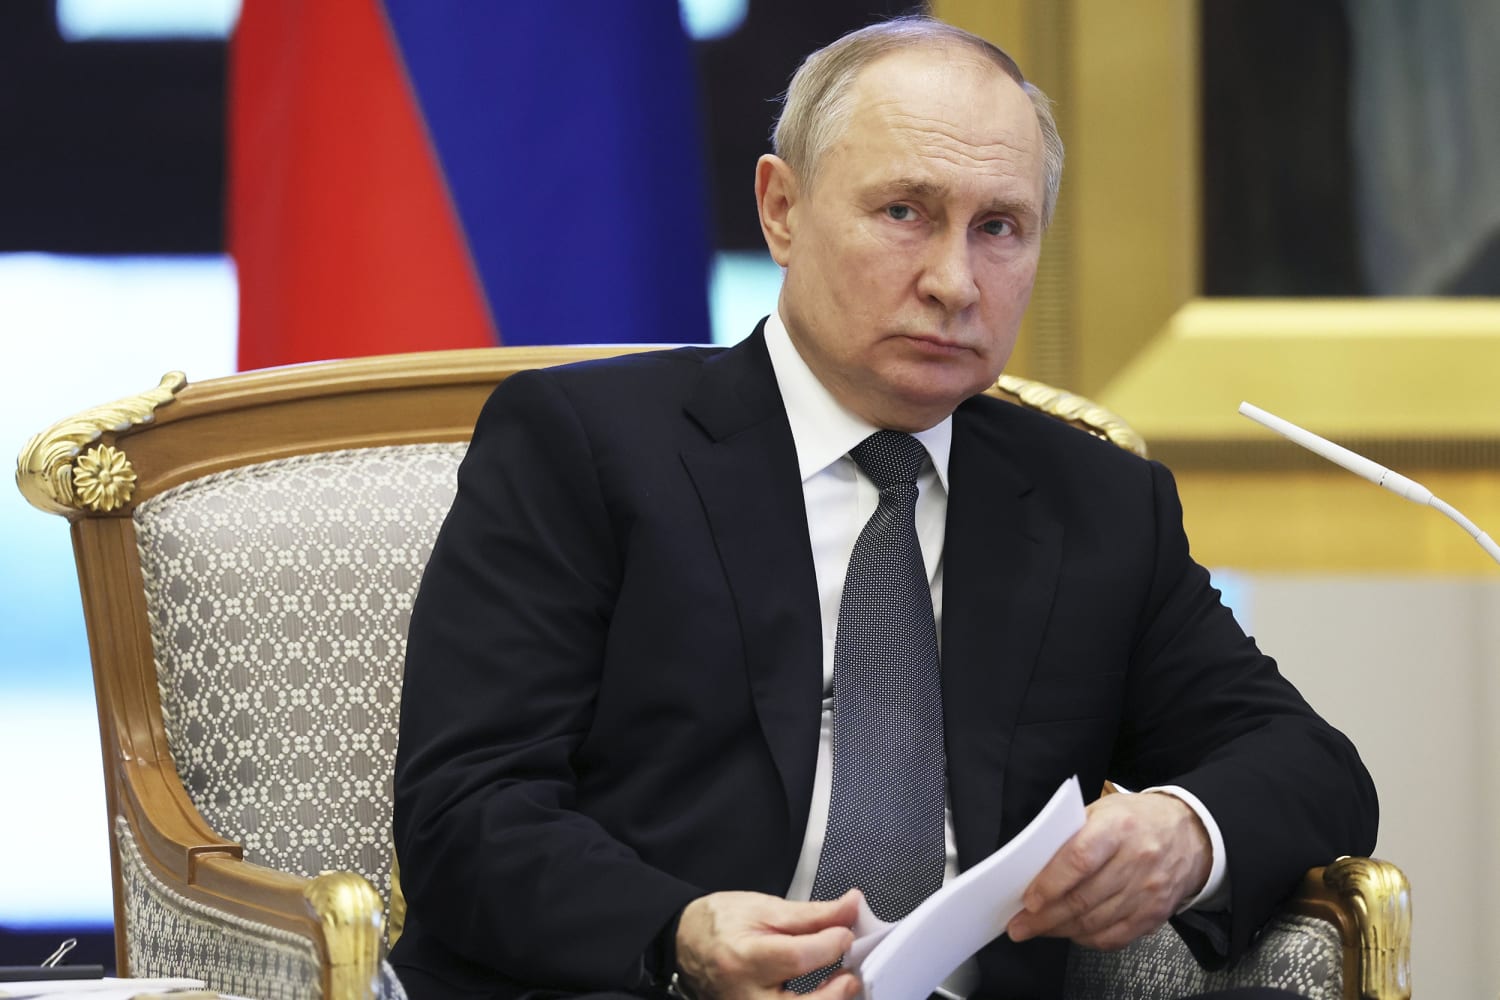 Putin will seek another presidential term in Russia, extending his rule of  over two decades